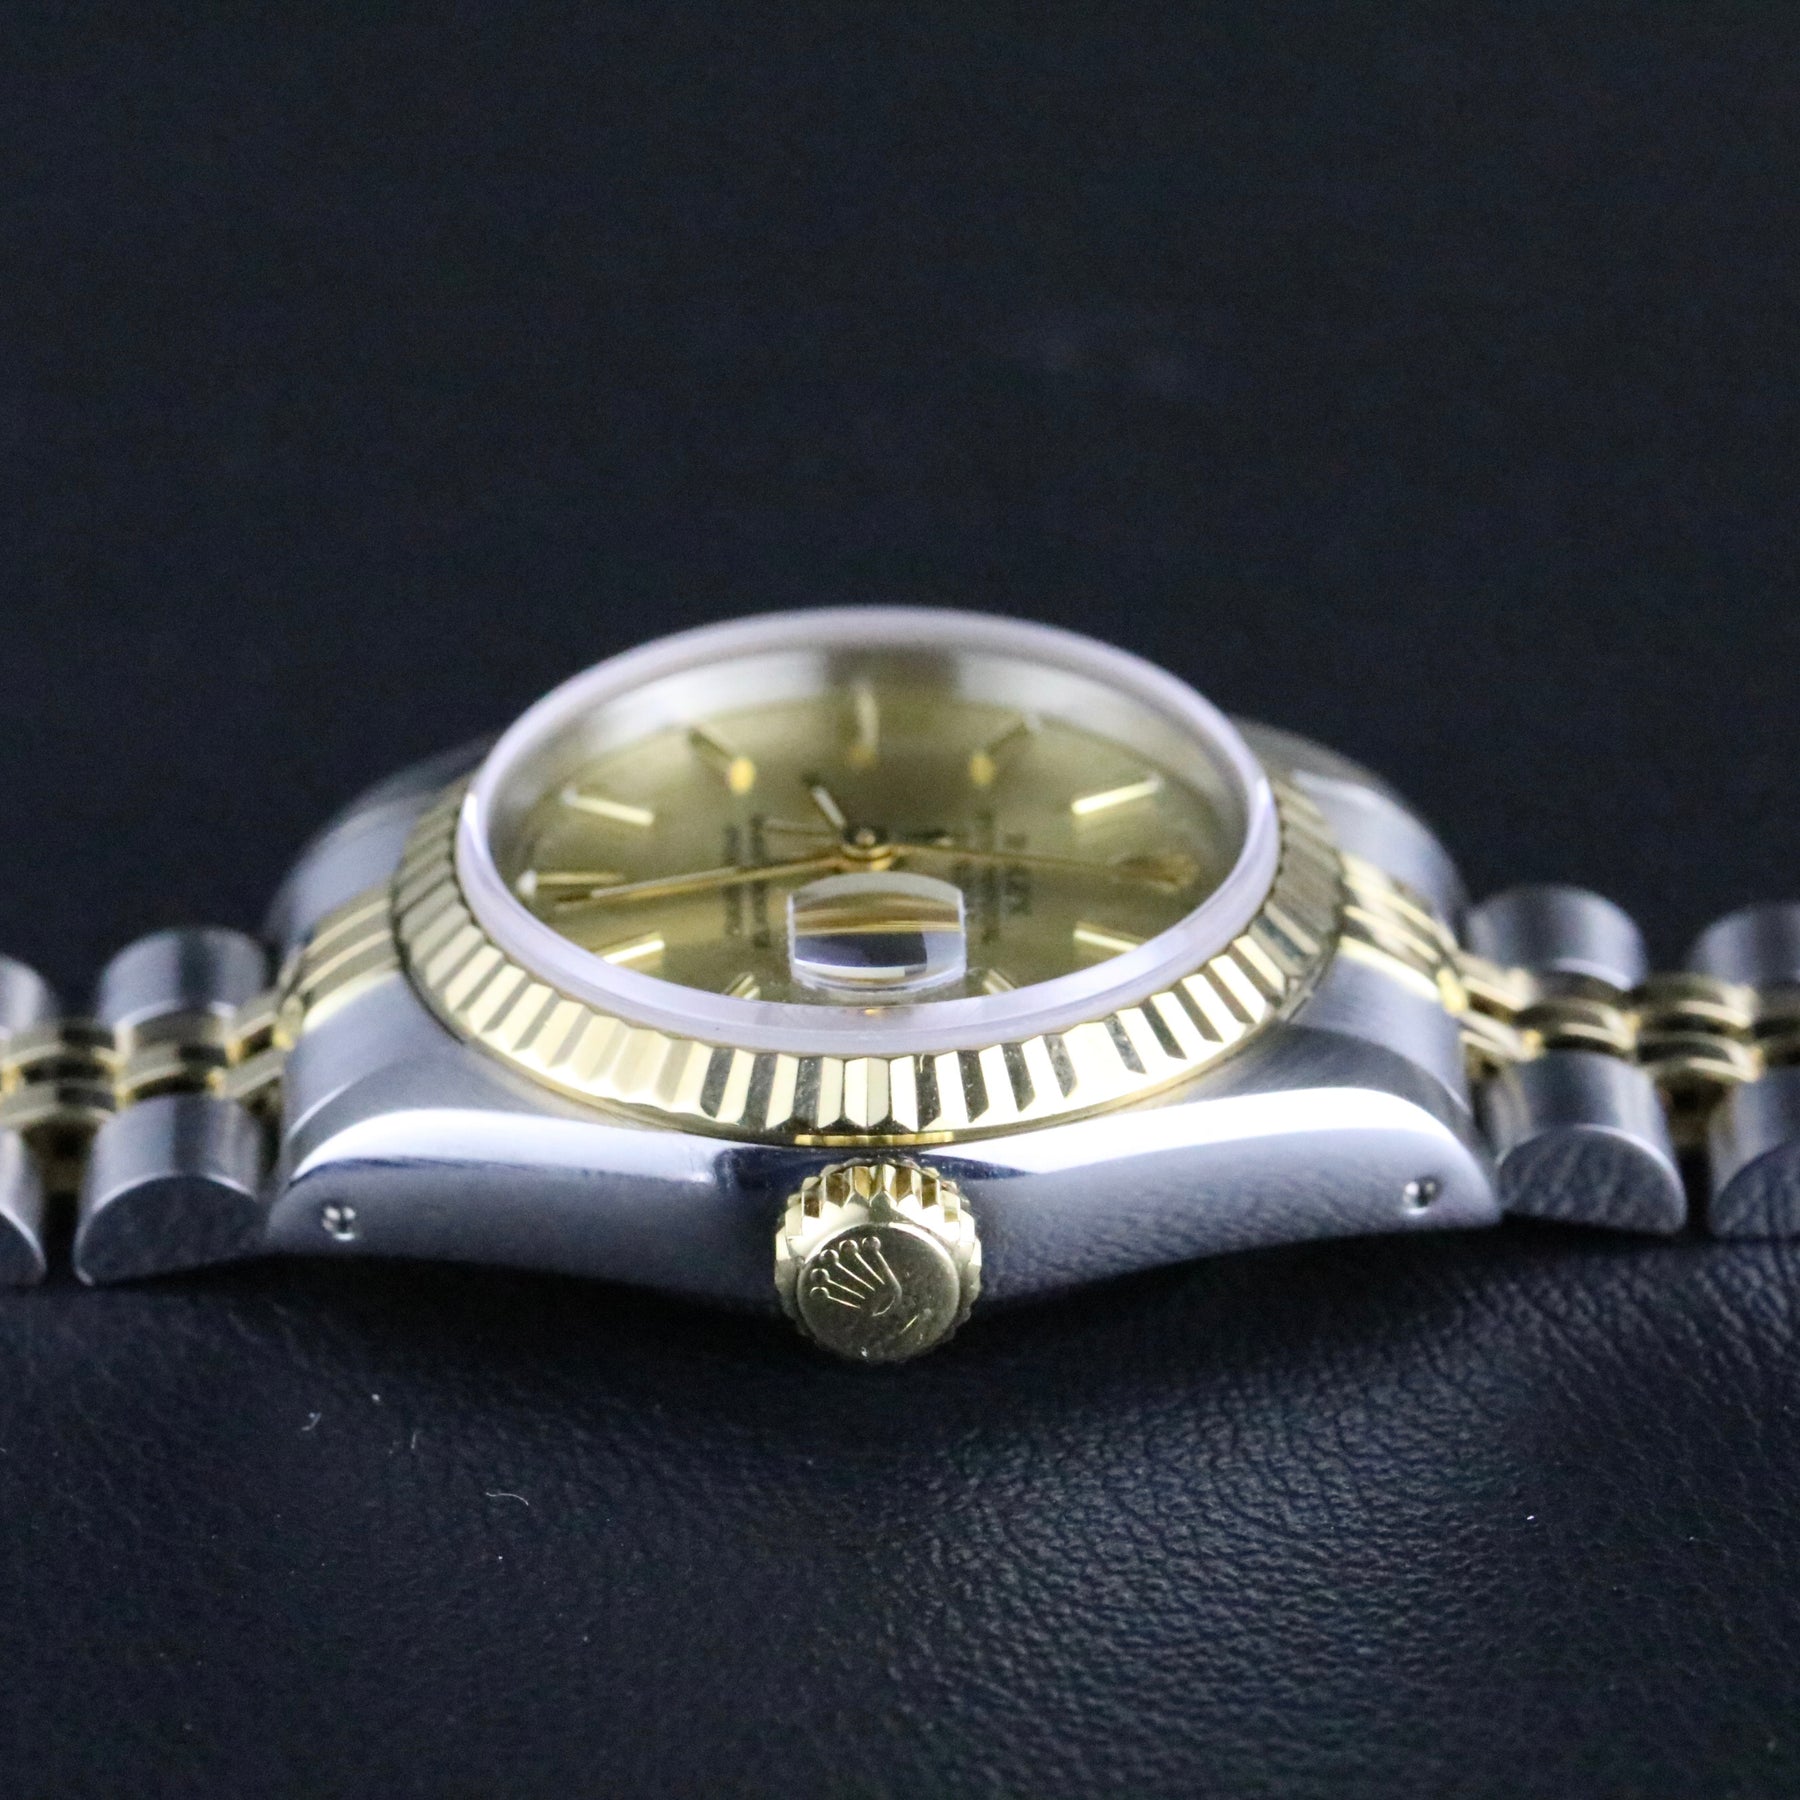 Rolex 69173 26mm SS/YG Datejust Holes Case with Paper